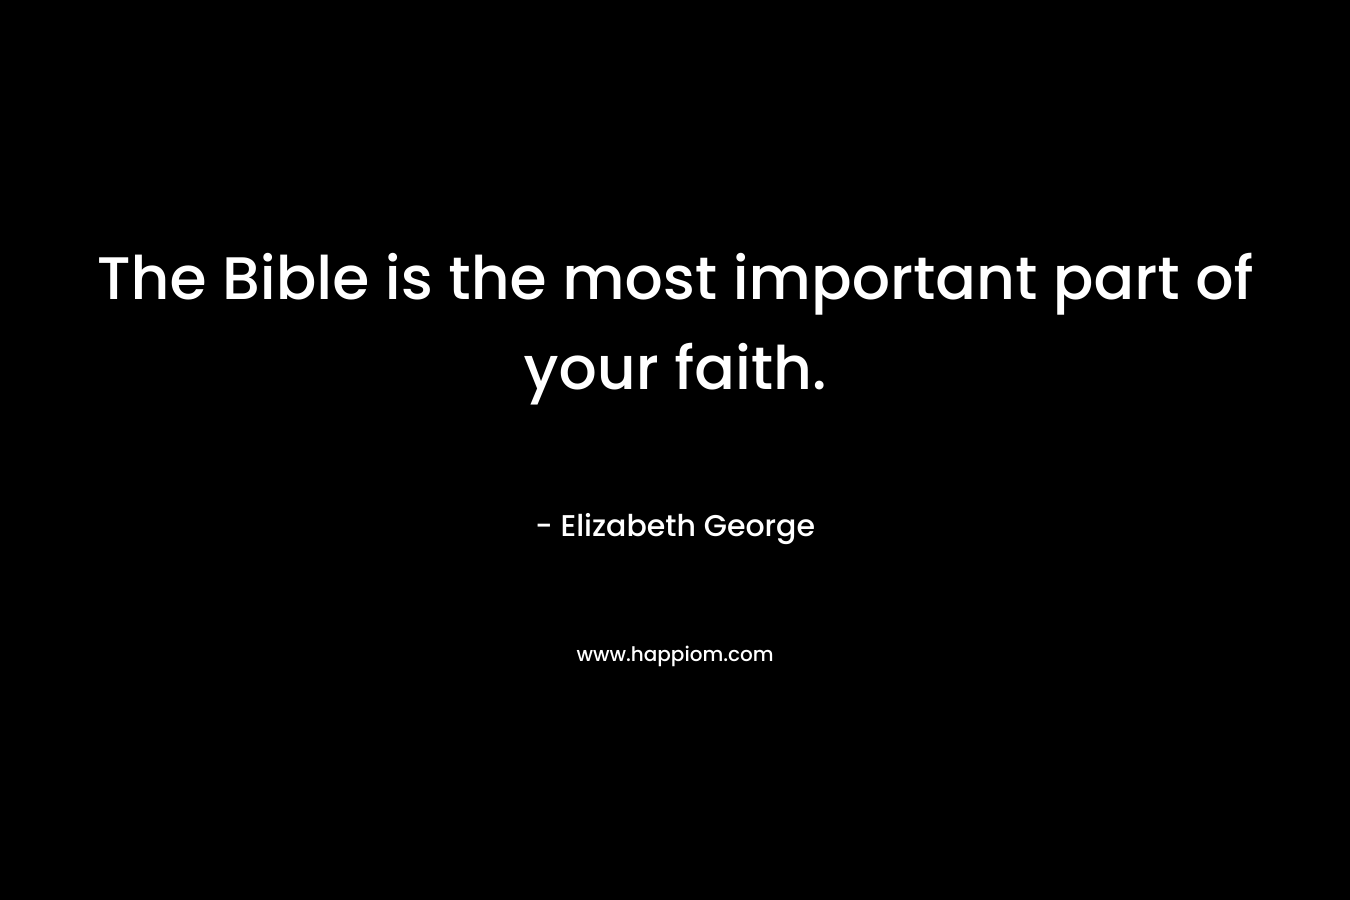 The Bible is the most important part of your faith.